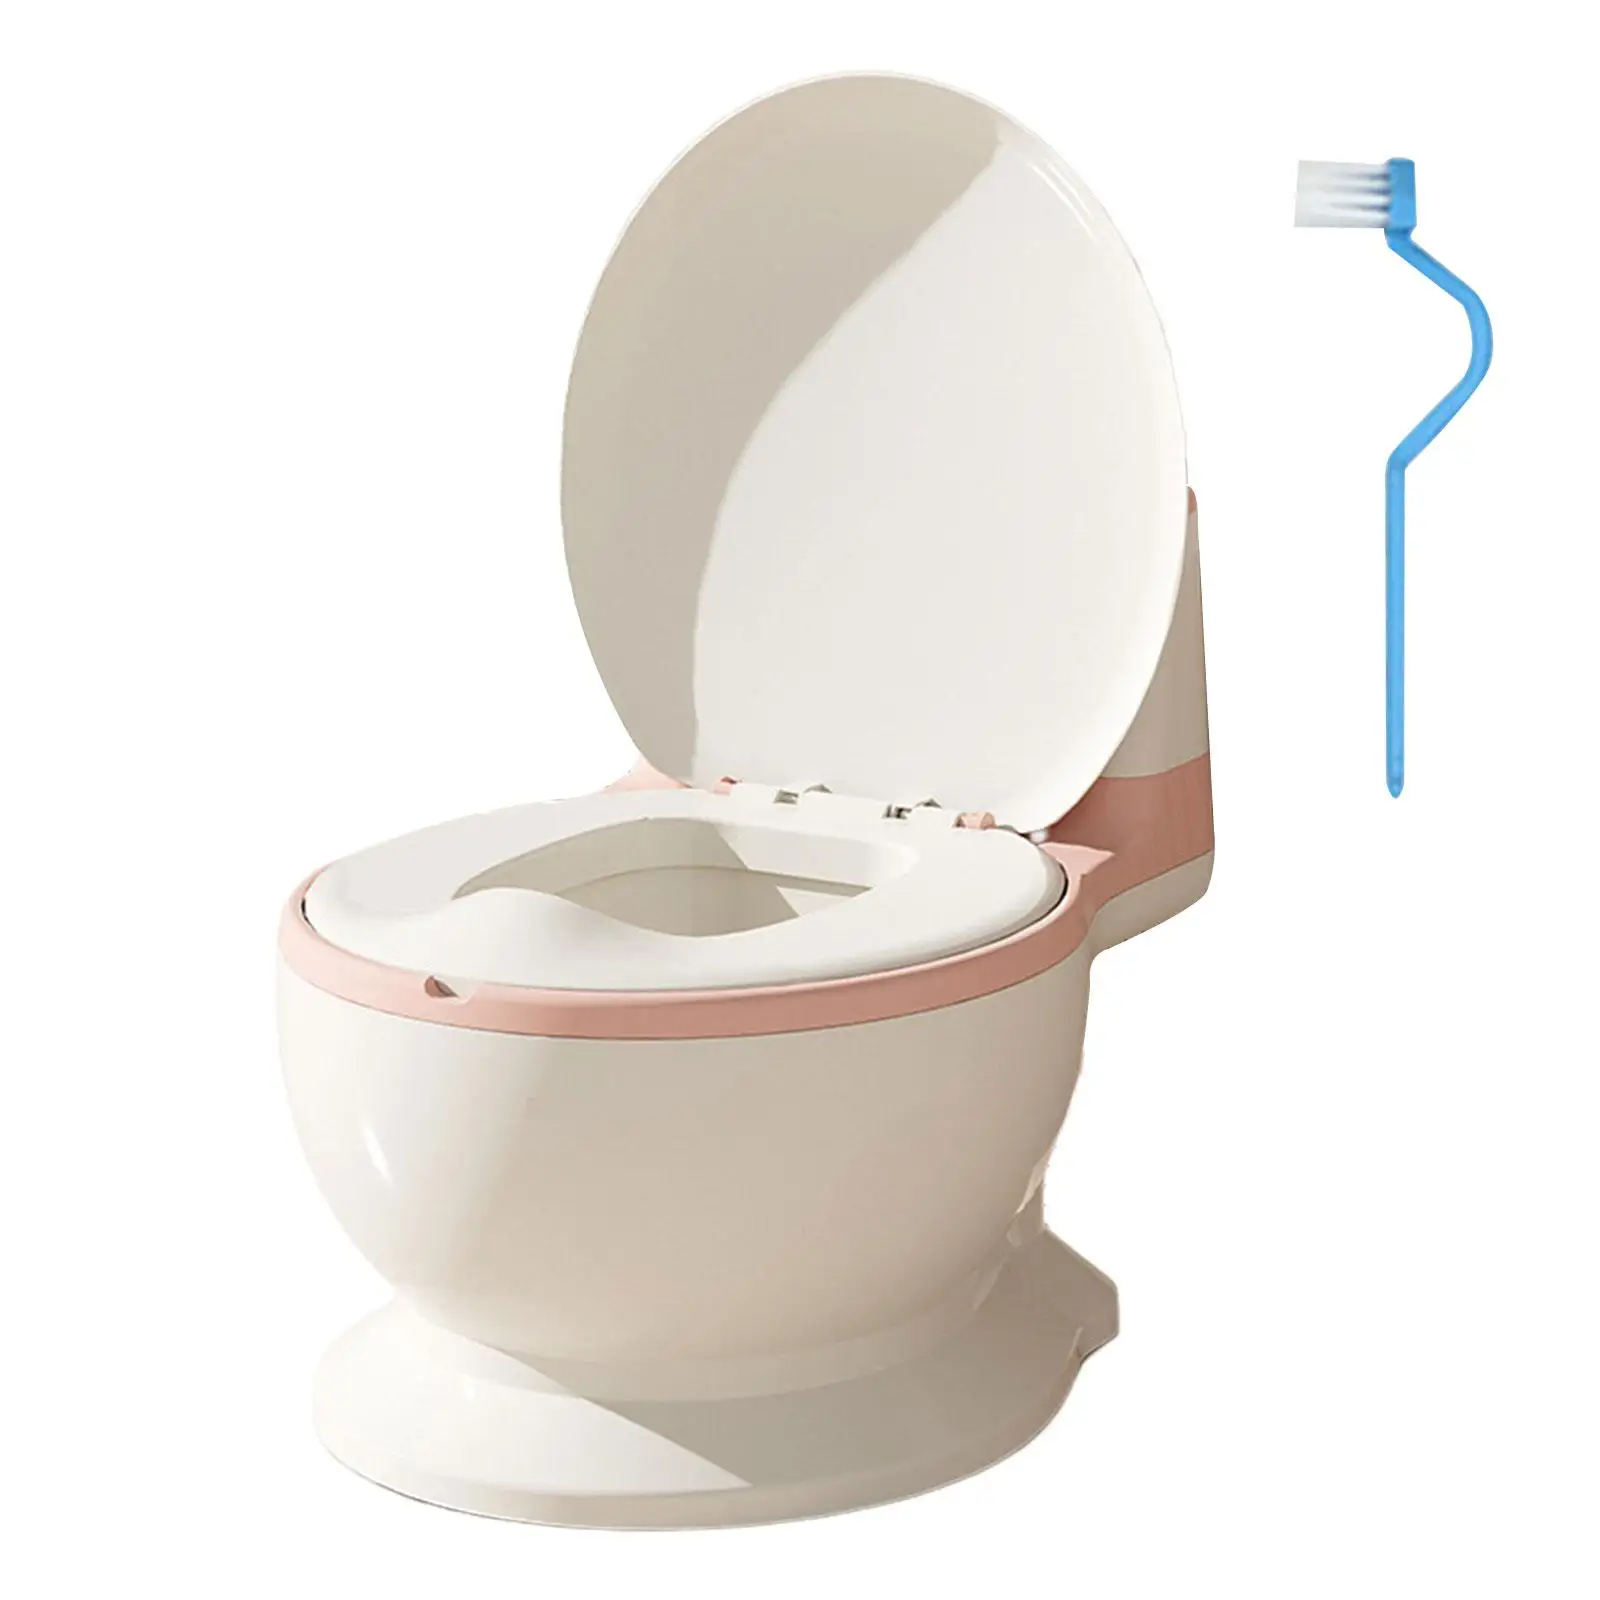 Toilet Training Potty Compact Size Realistic Toilet for Bedroom Girls Boys